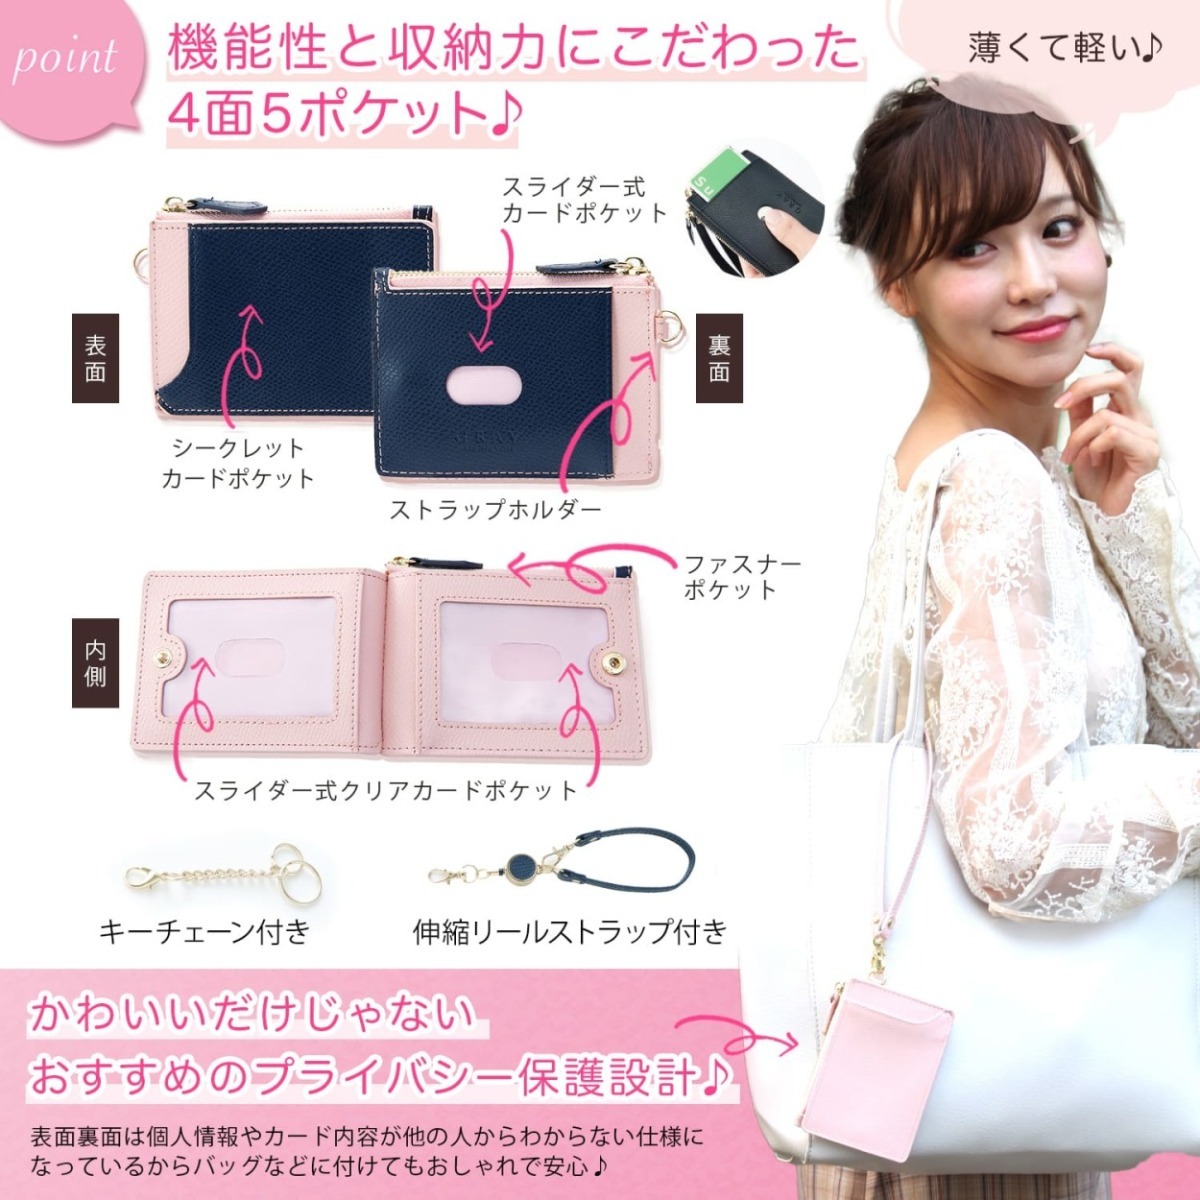  pass case ticket holder lady's folding in half original leather card-case reel attaching key chain change purse . thin type SUICA IC card ID license proof GRAV